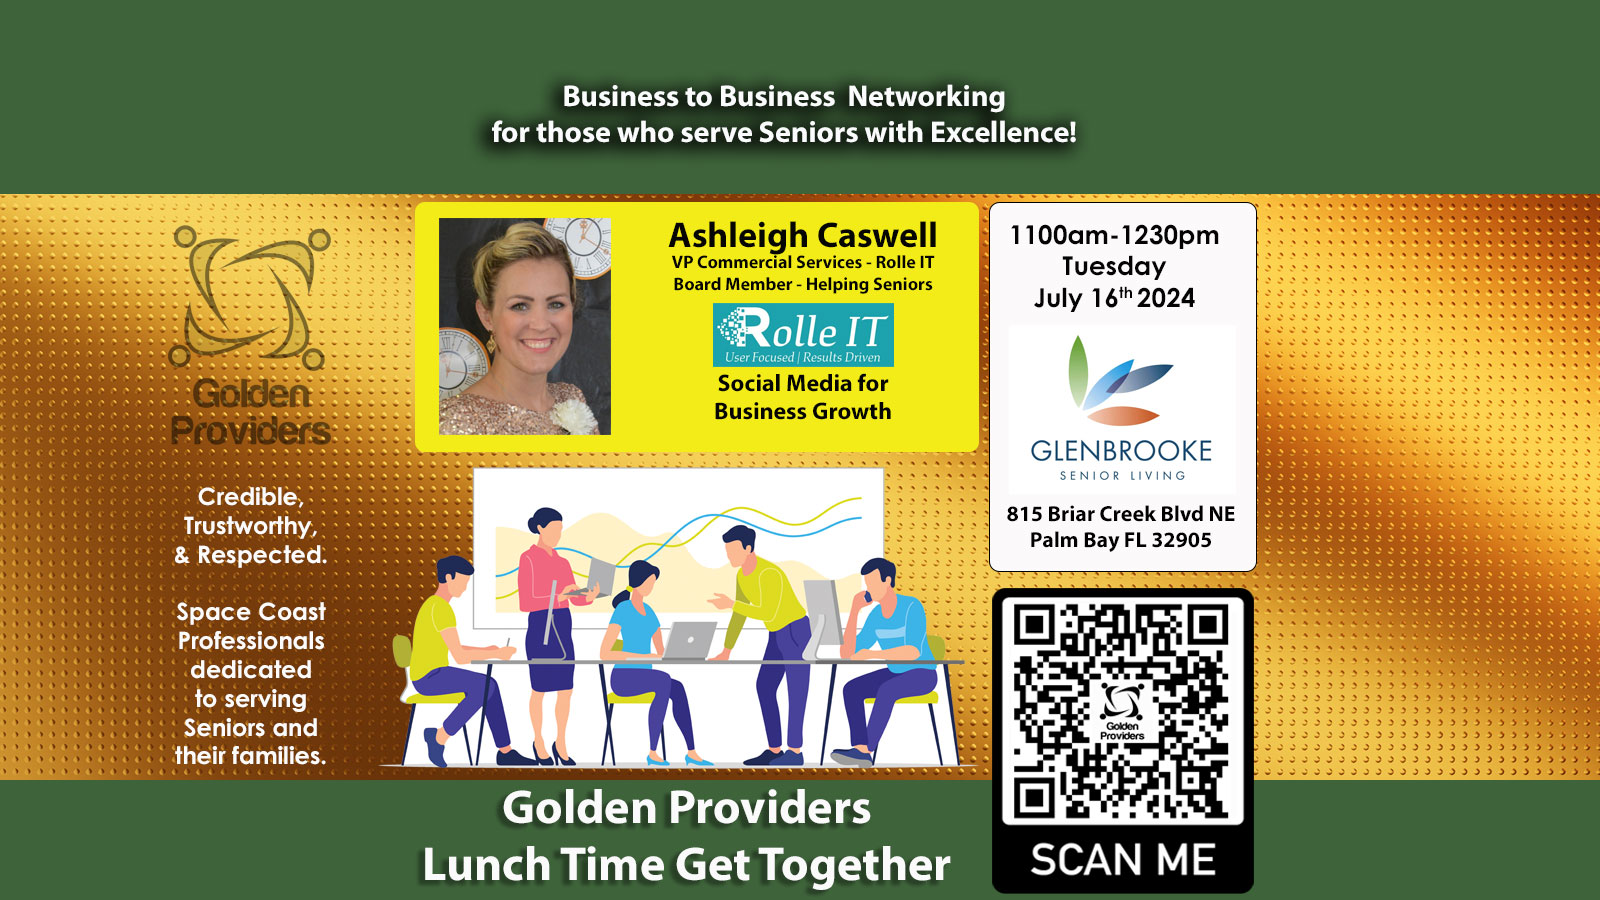 Golden Providers July 2024 Meeting